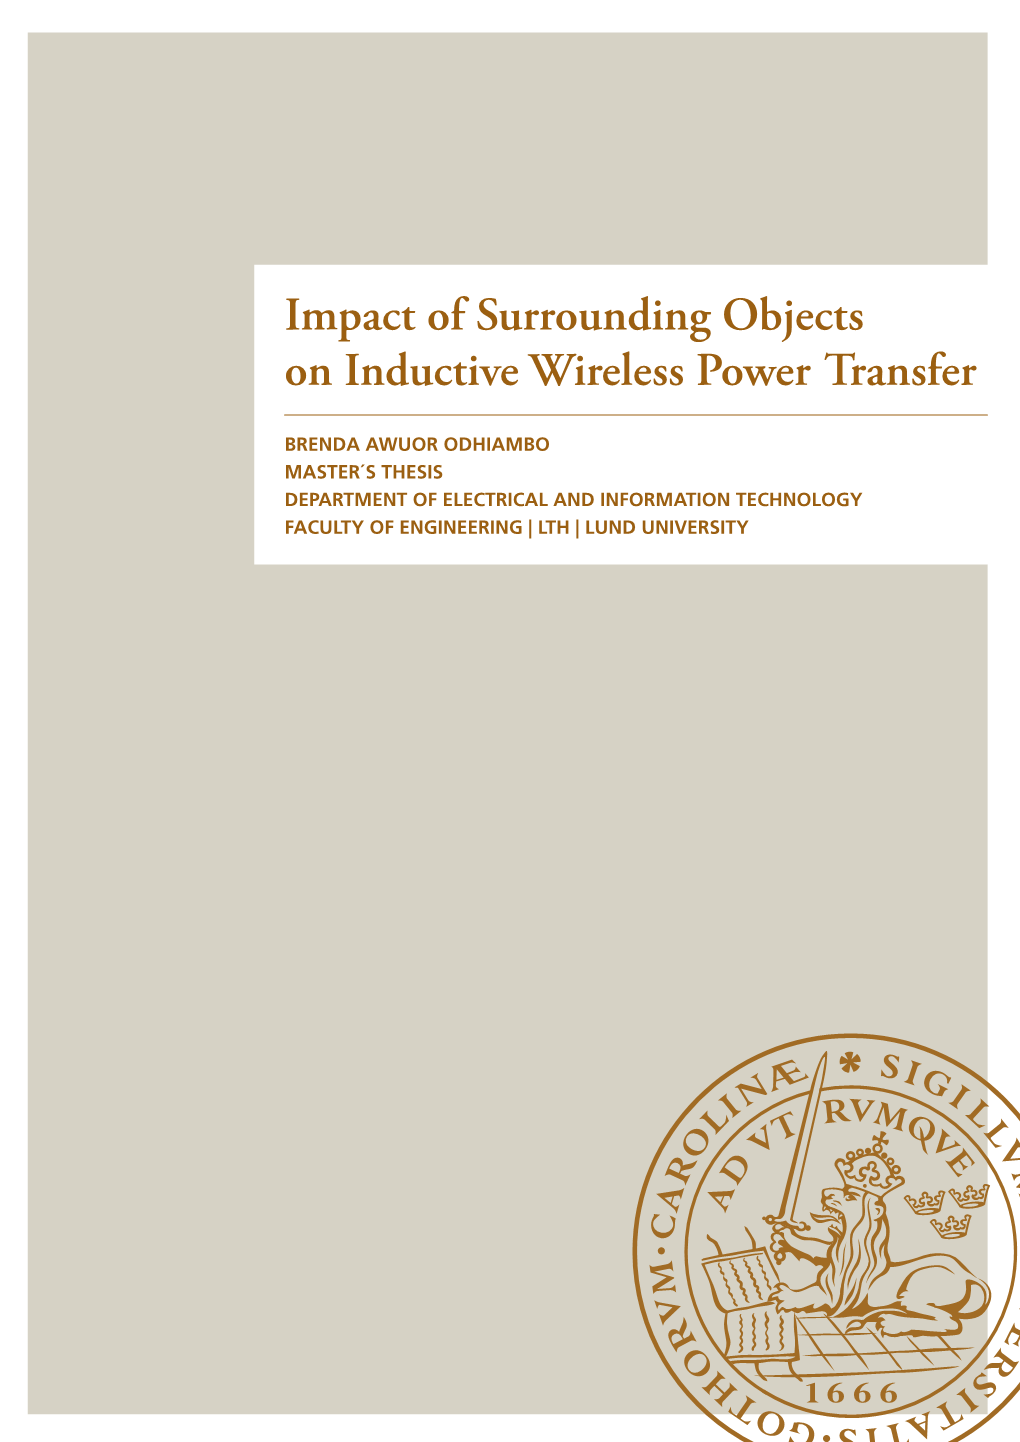 Impact of Surrounding Objects on Inductive Wireless Power Transfer